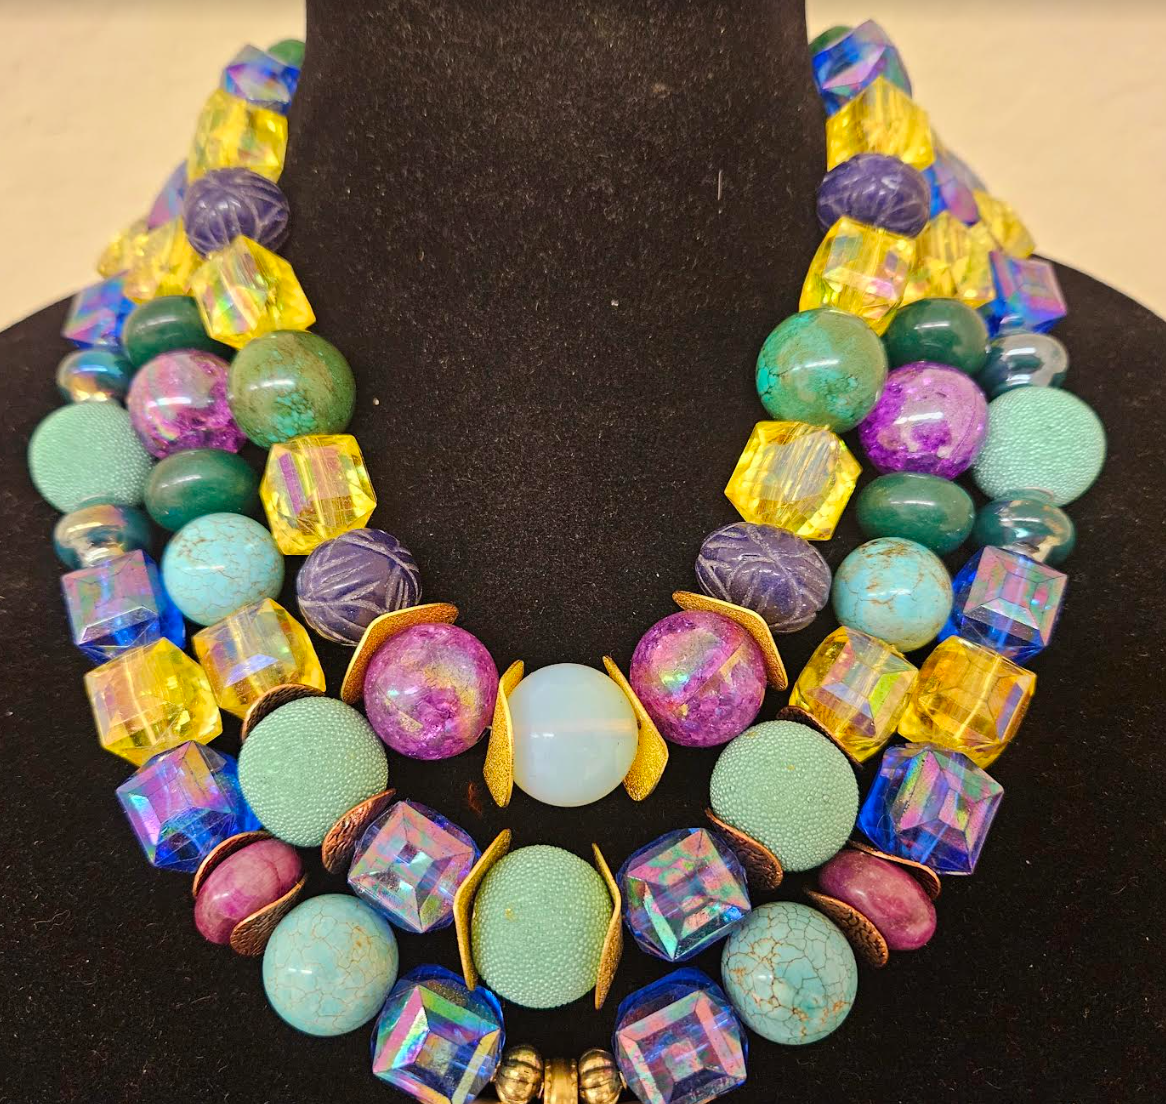 Jeweltone Multi Strand Beaded Statement Necklace with Double Dragon Pendant - Bold Chunky Lightweight OOAK Wearable Art Neck Candy - Kat Kouture Jewelry